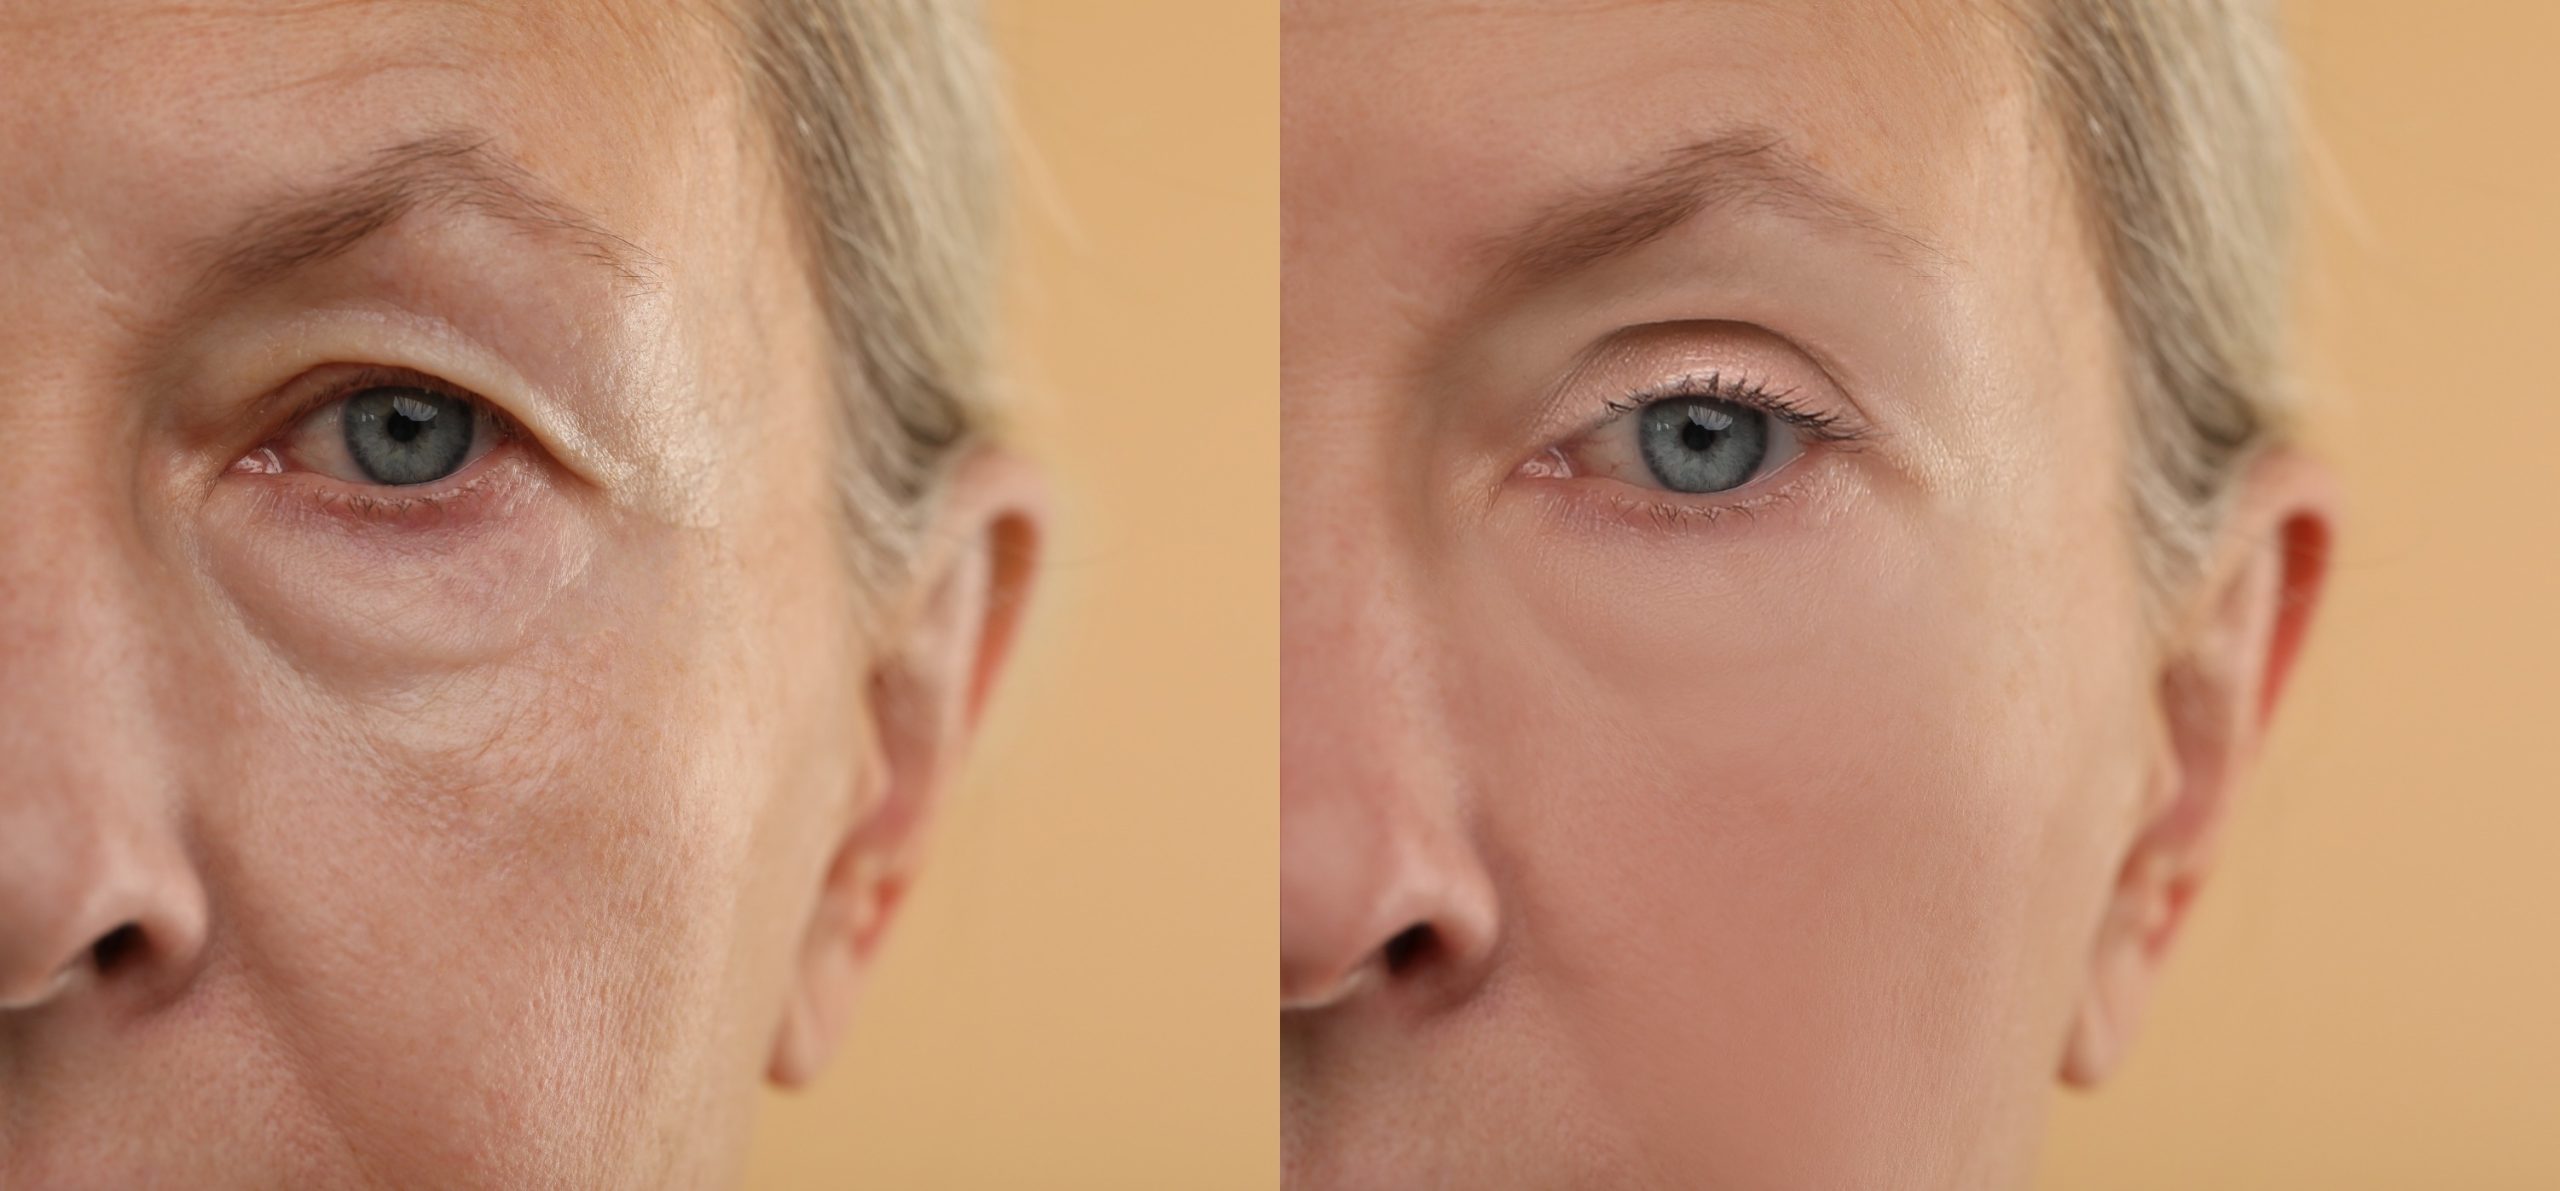 blepharoplasty Before and After Picture